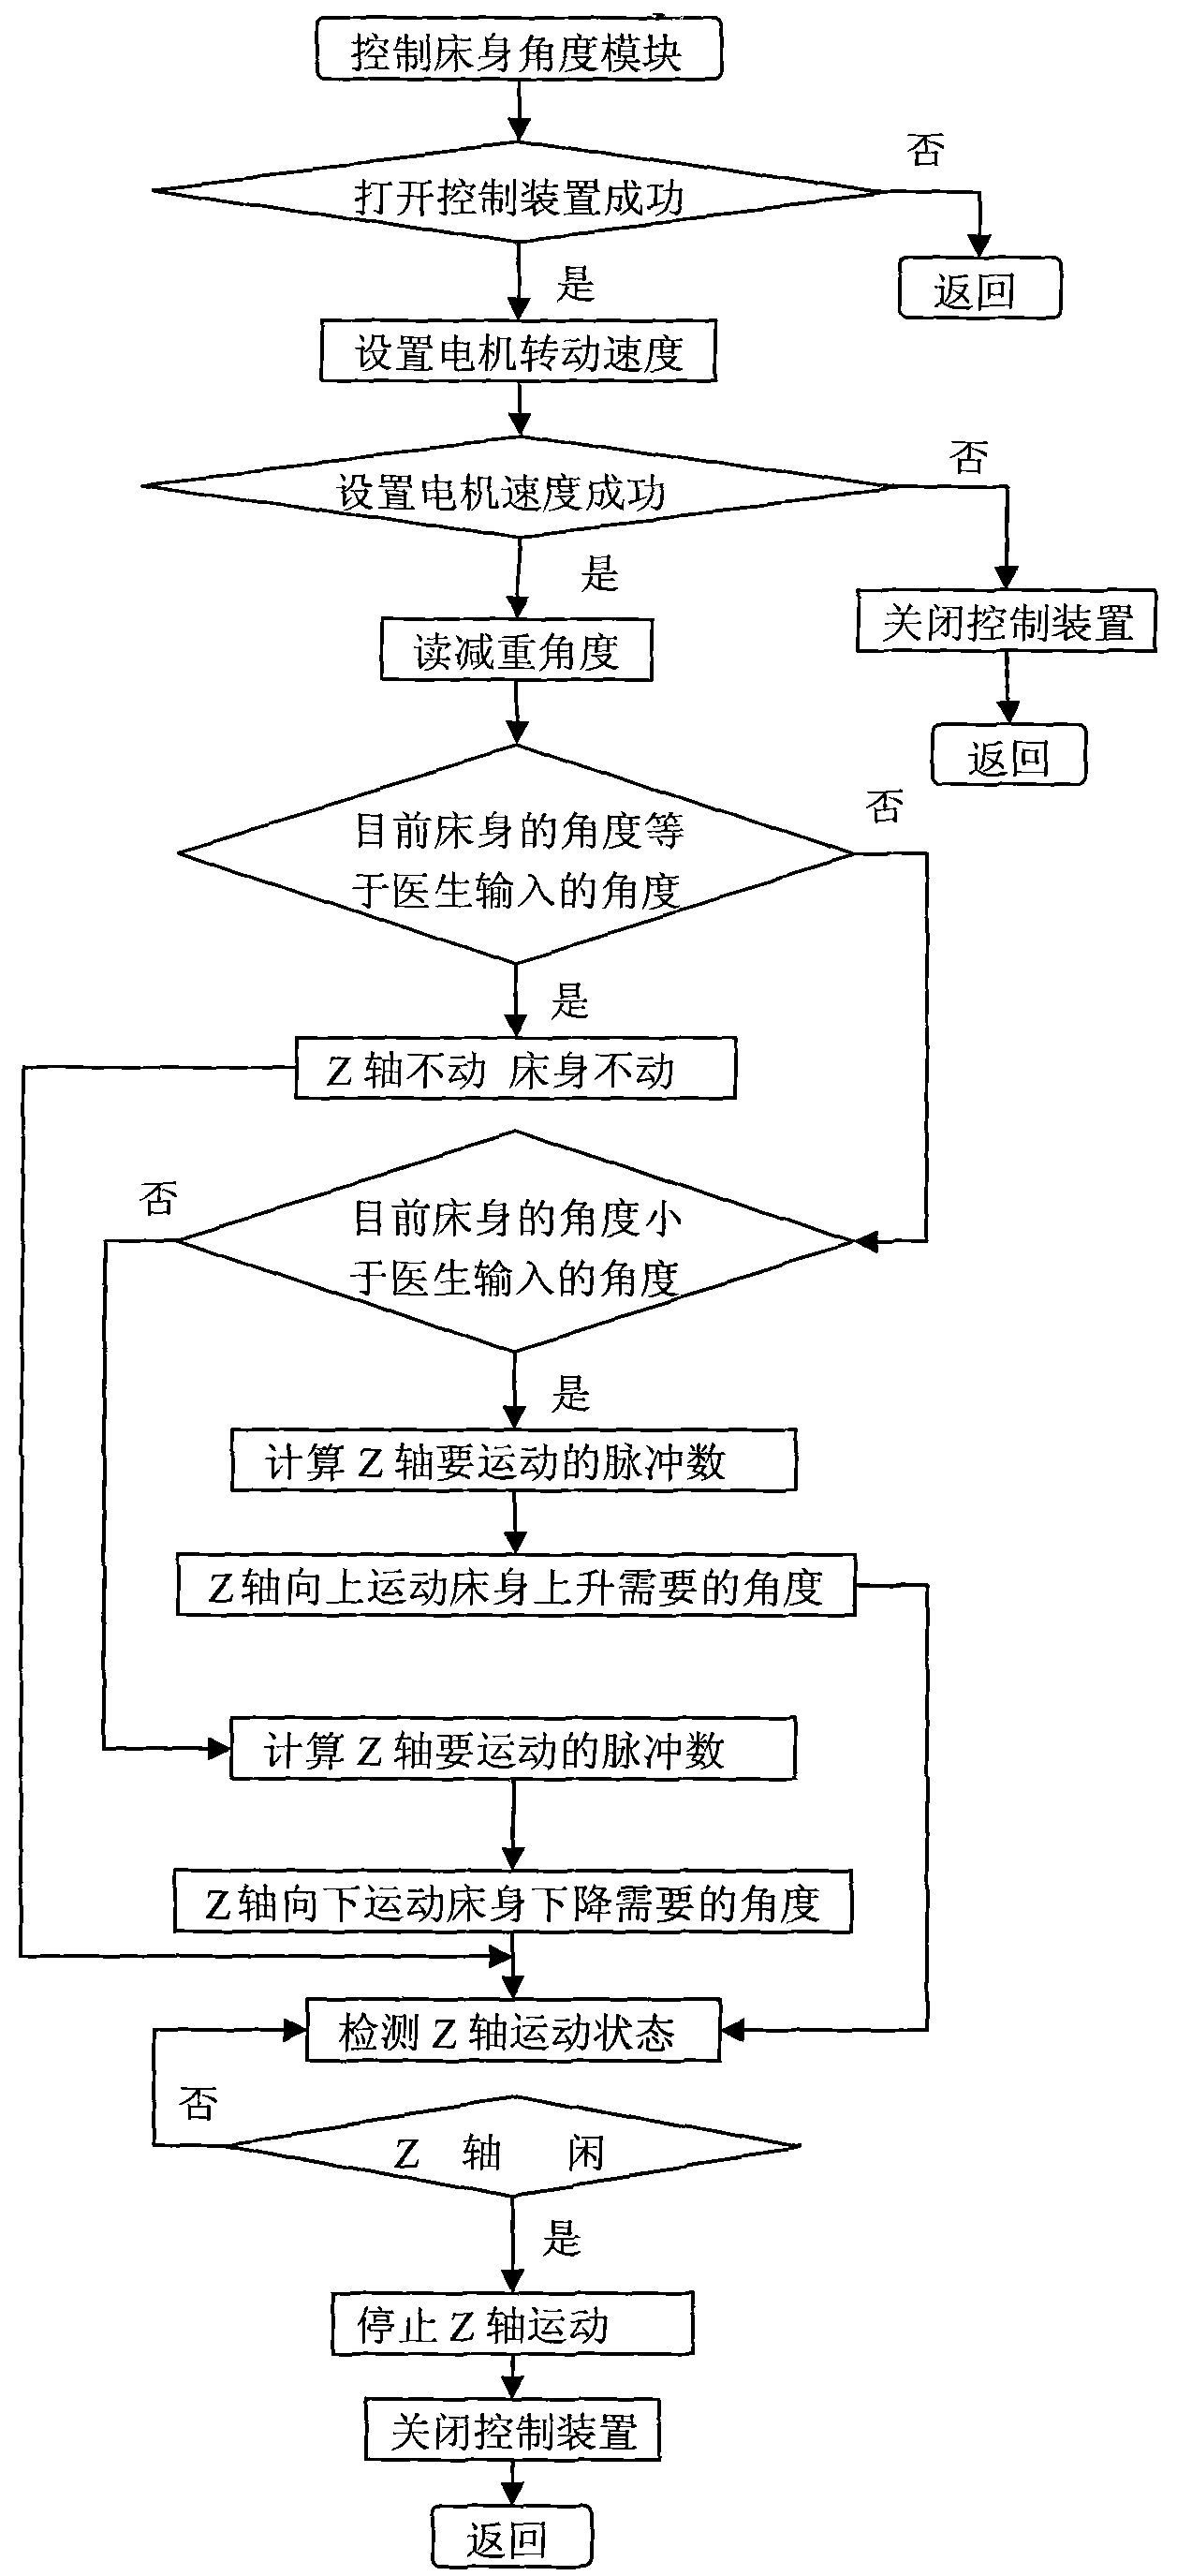 Intellectualized passive lower-limb function testing and training method